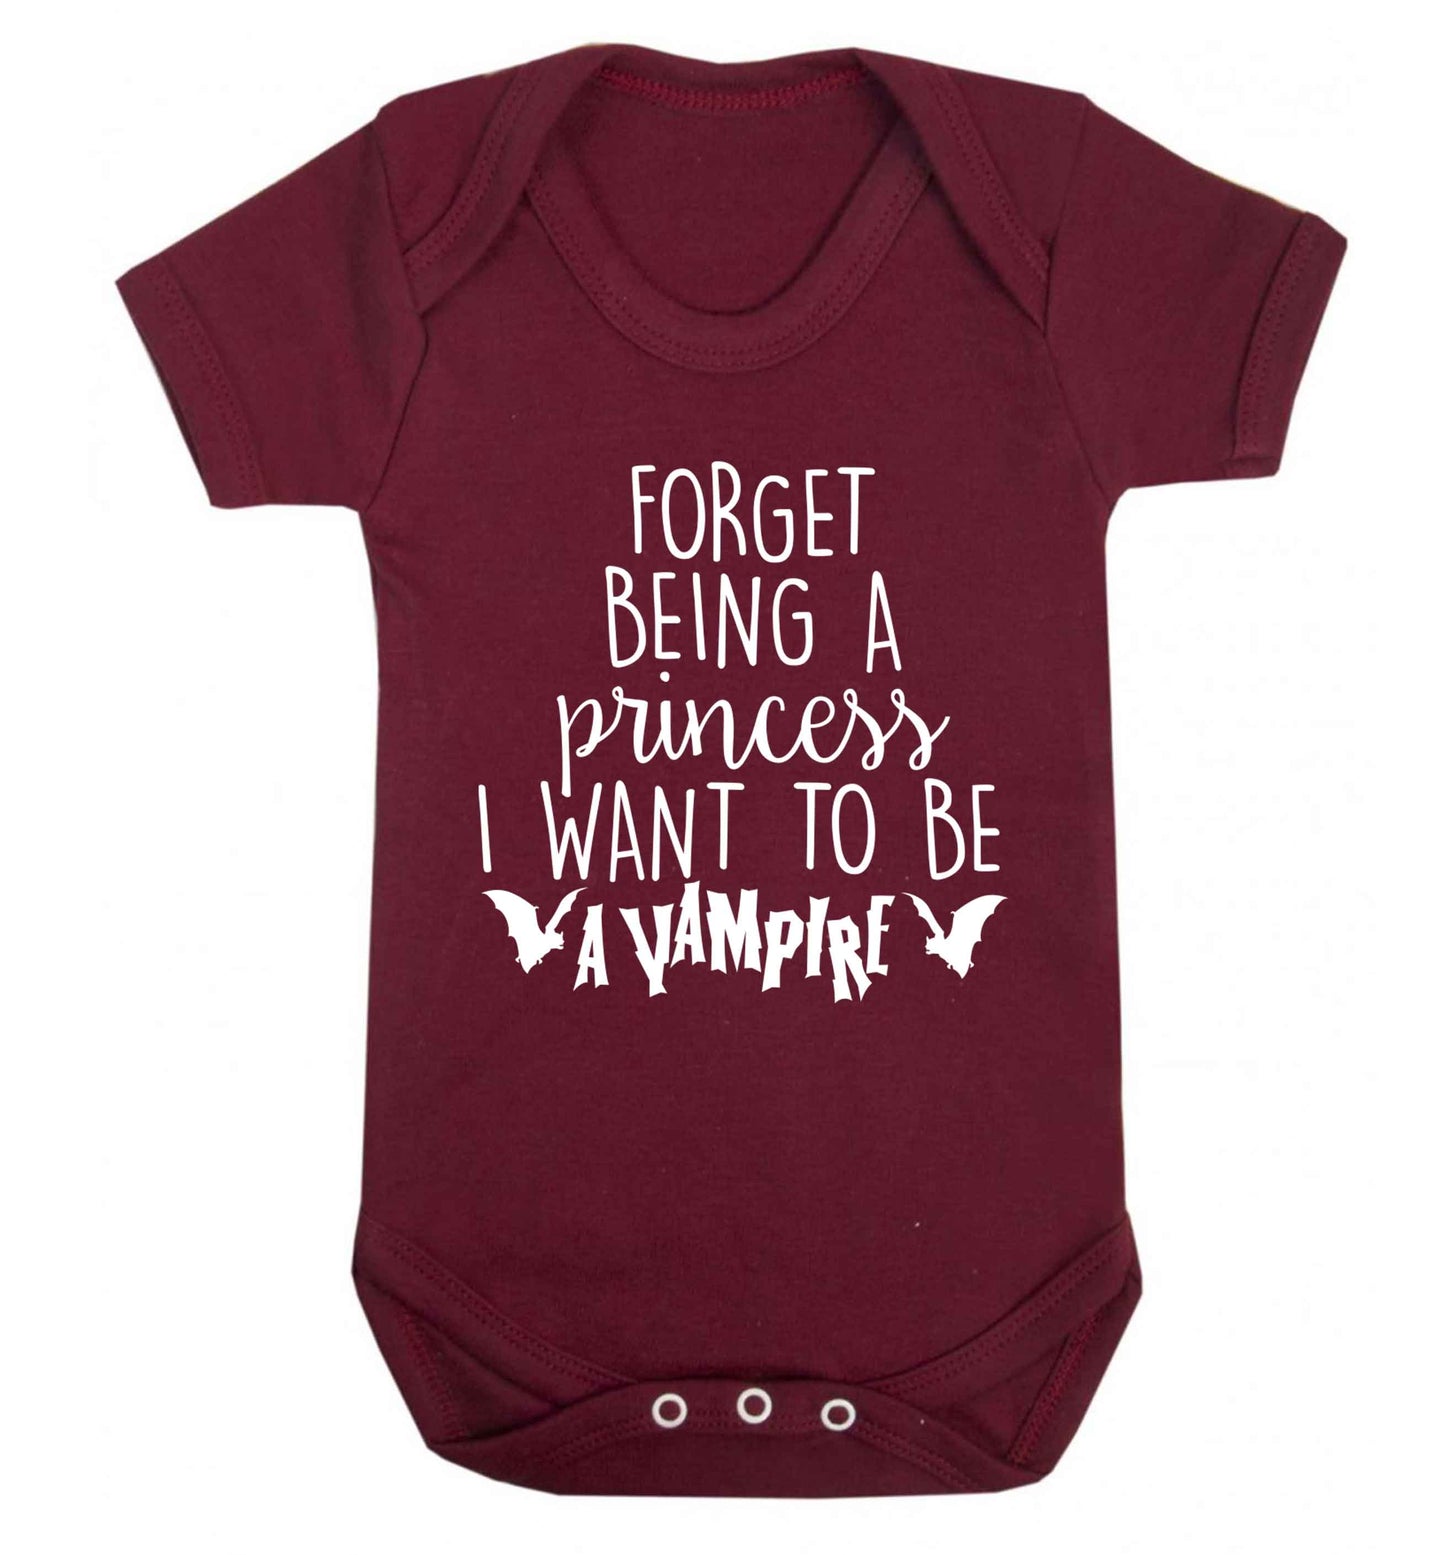 Forget being a princess I want to be a vampire Baby Vest maroon 18-24 months